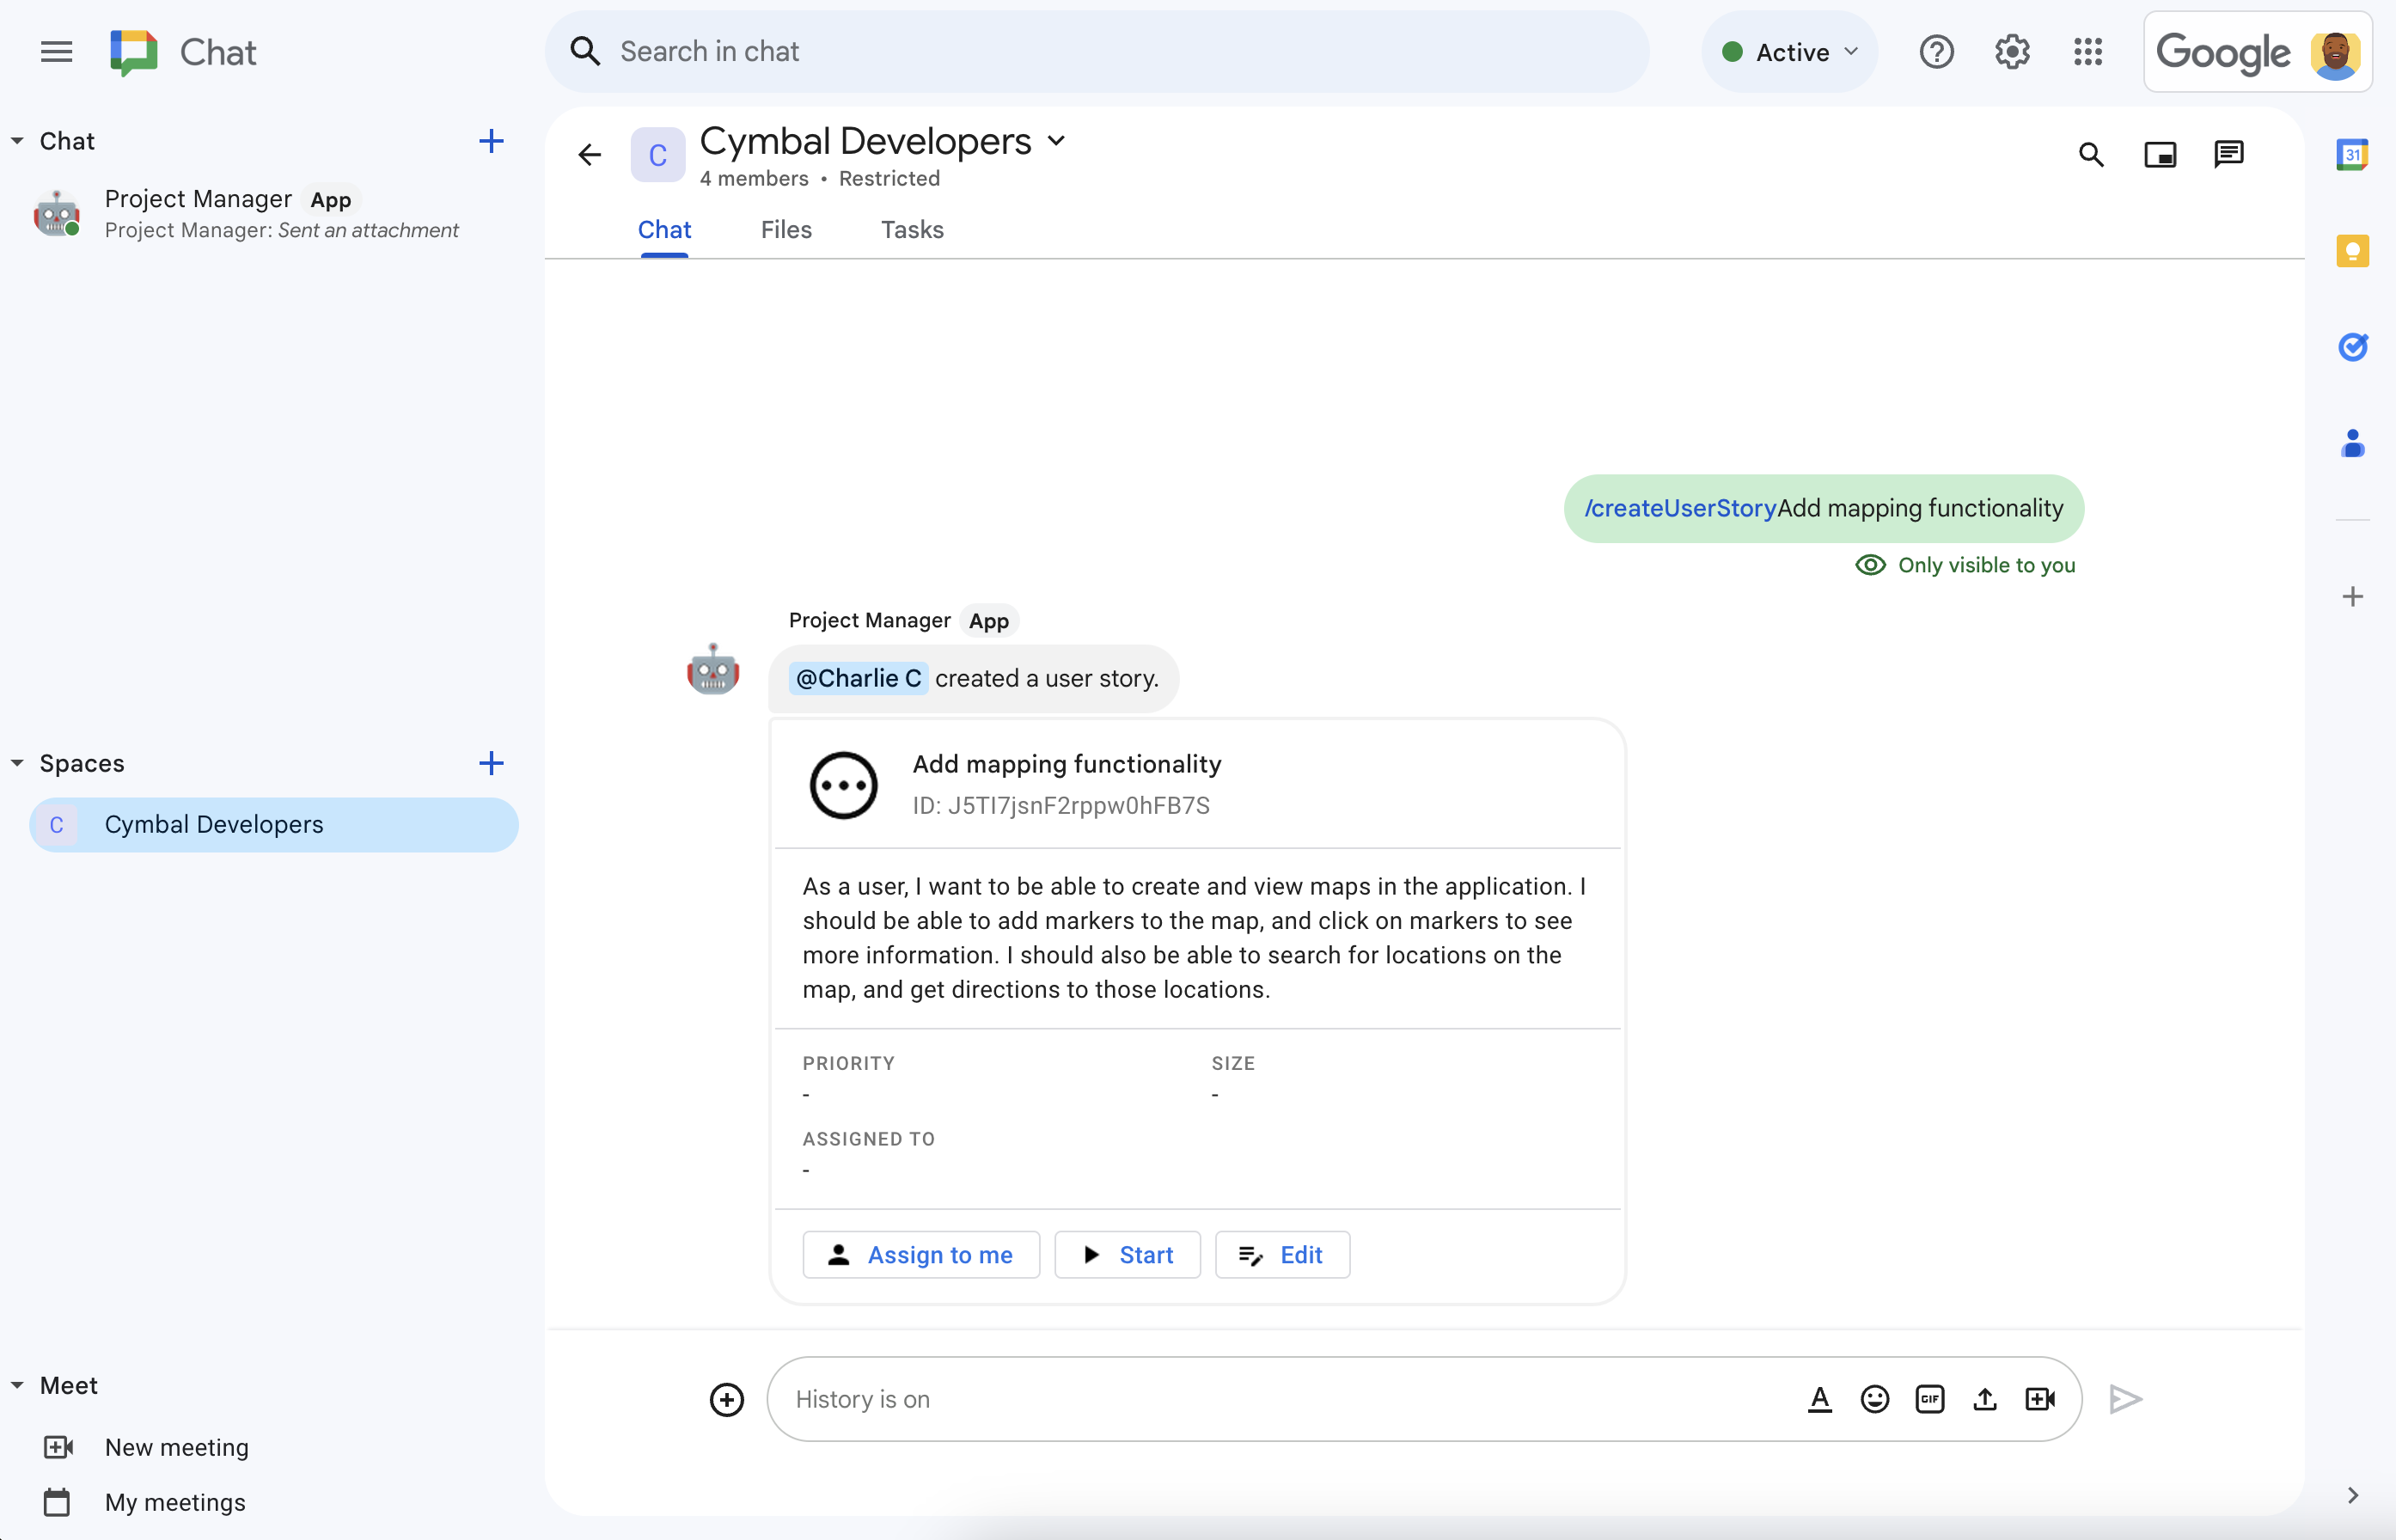 The project management Chat app uses Vertex AI to write the story description.